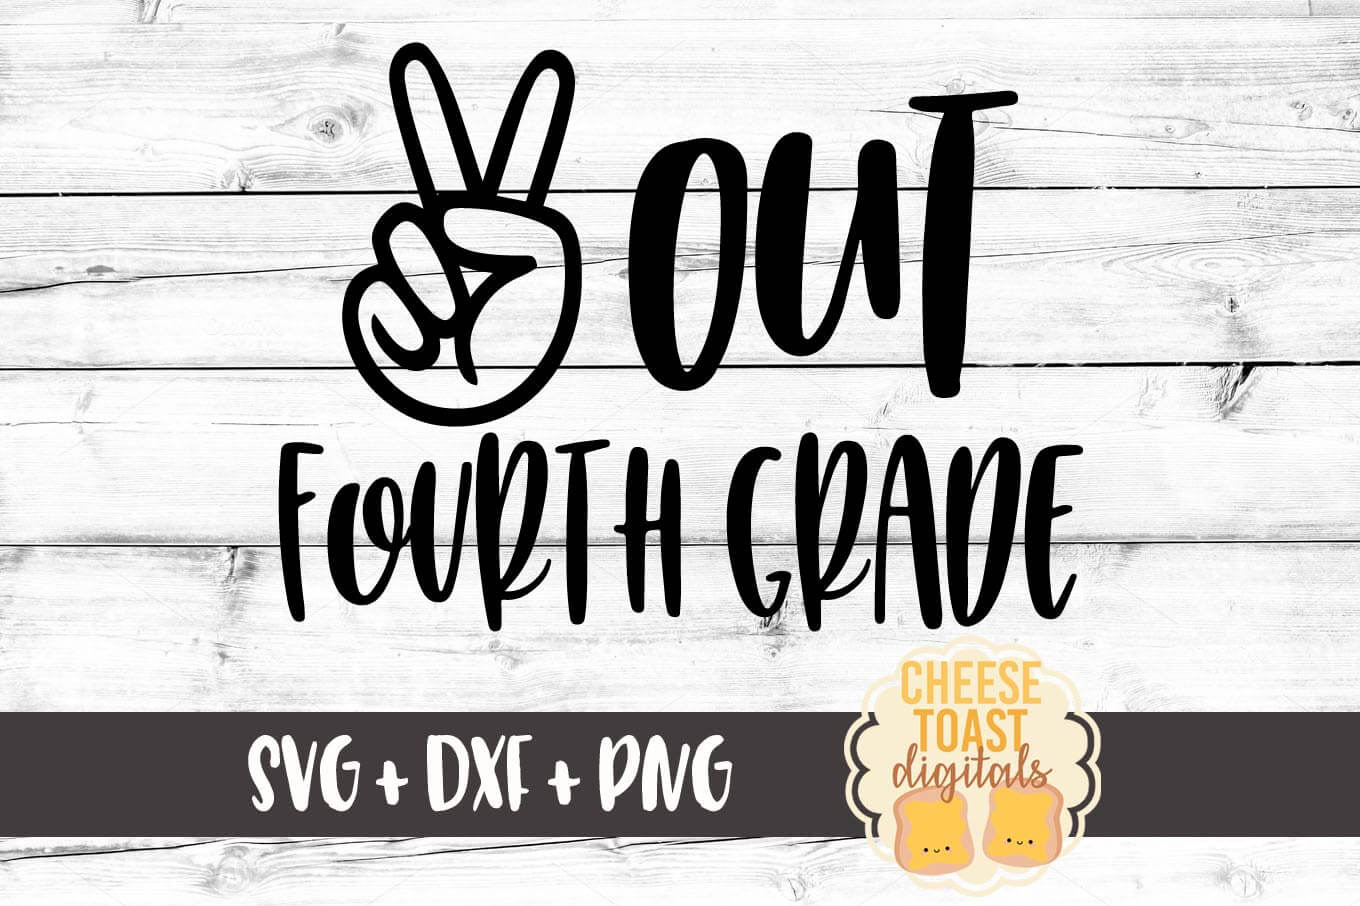 Peace Out Fourth Grade SVG - Free and Premium SVG Files ...